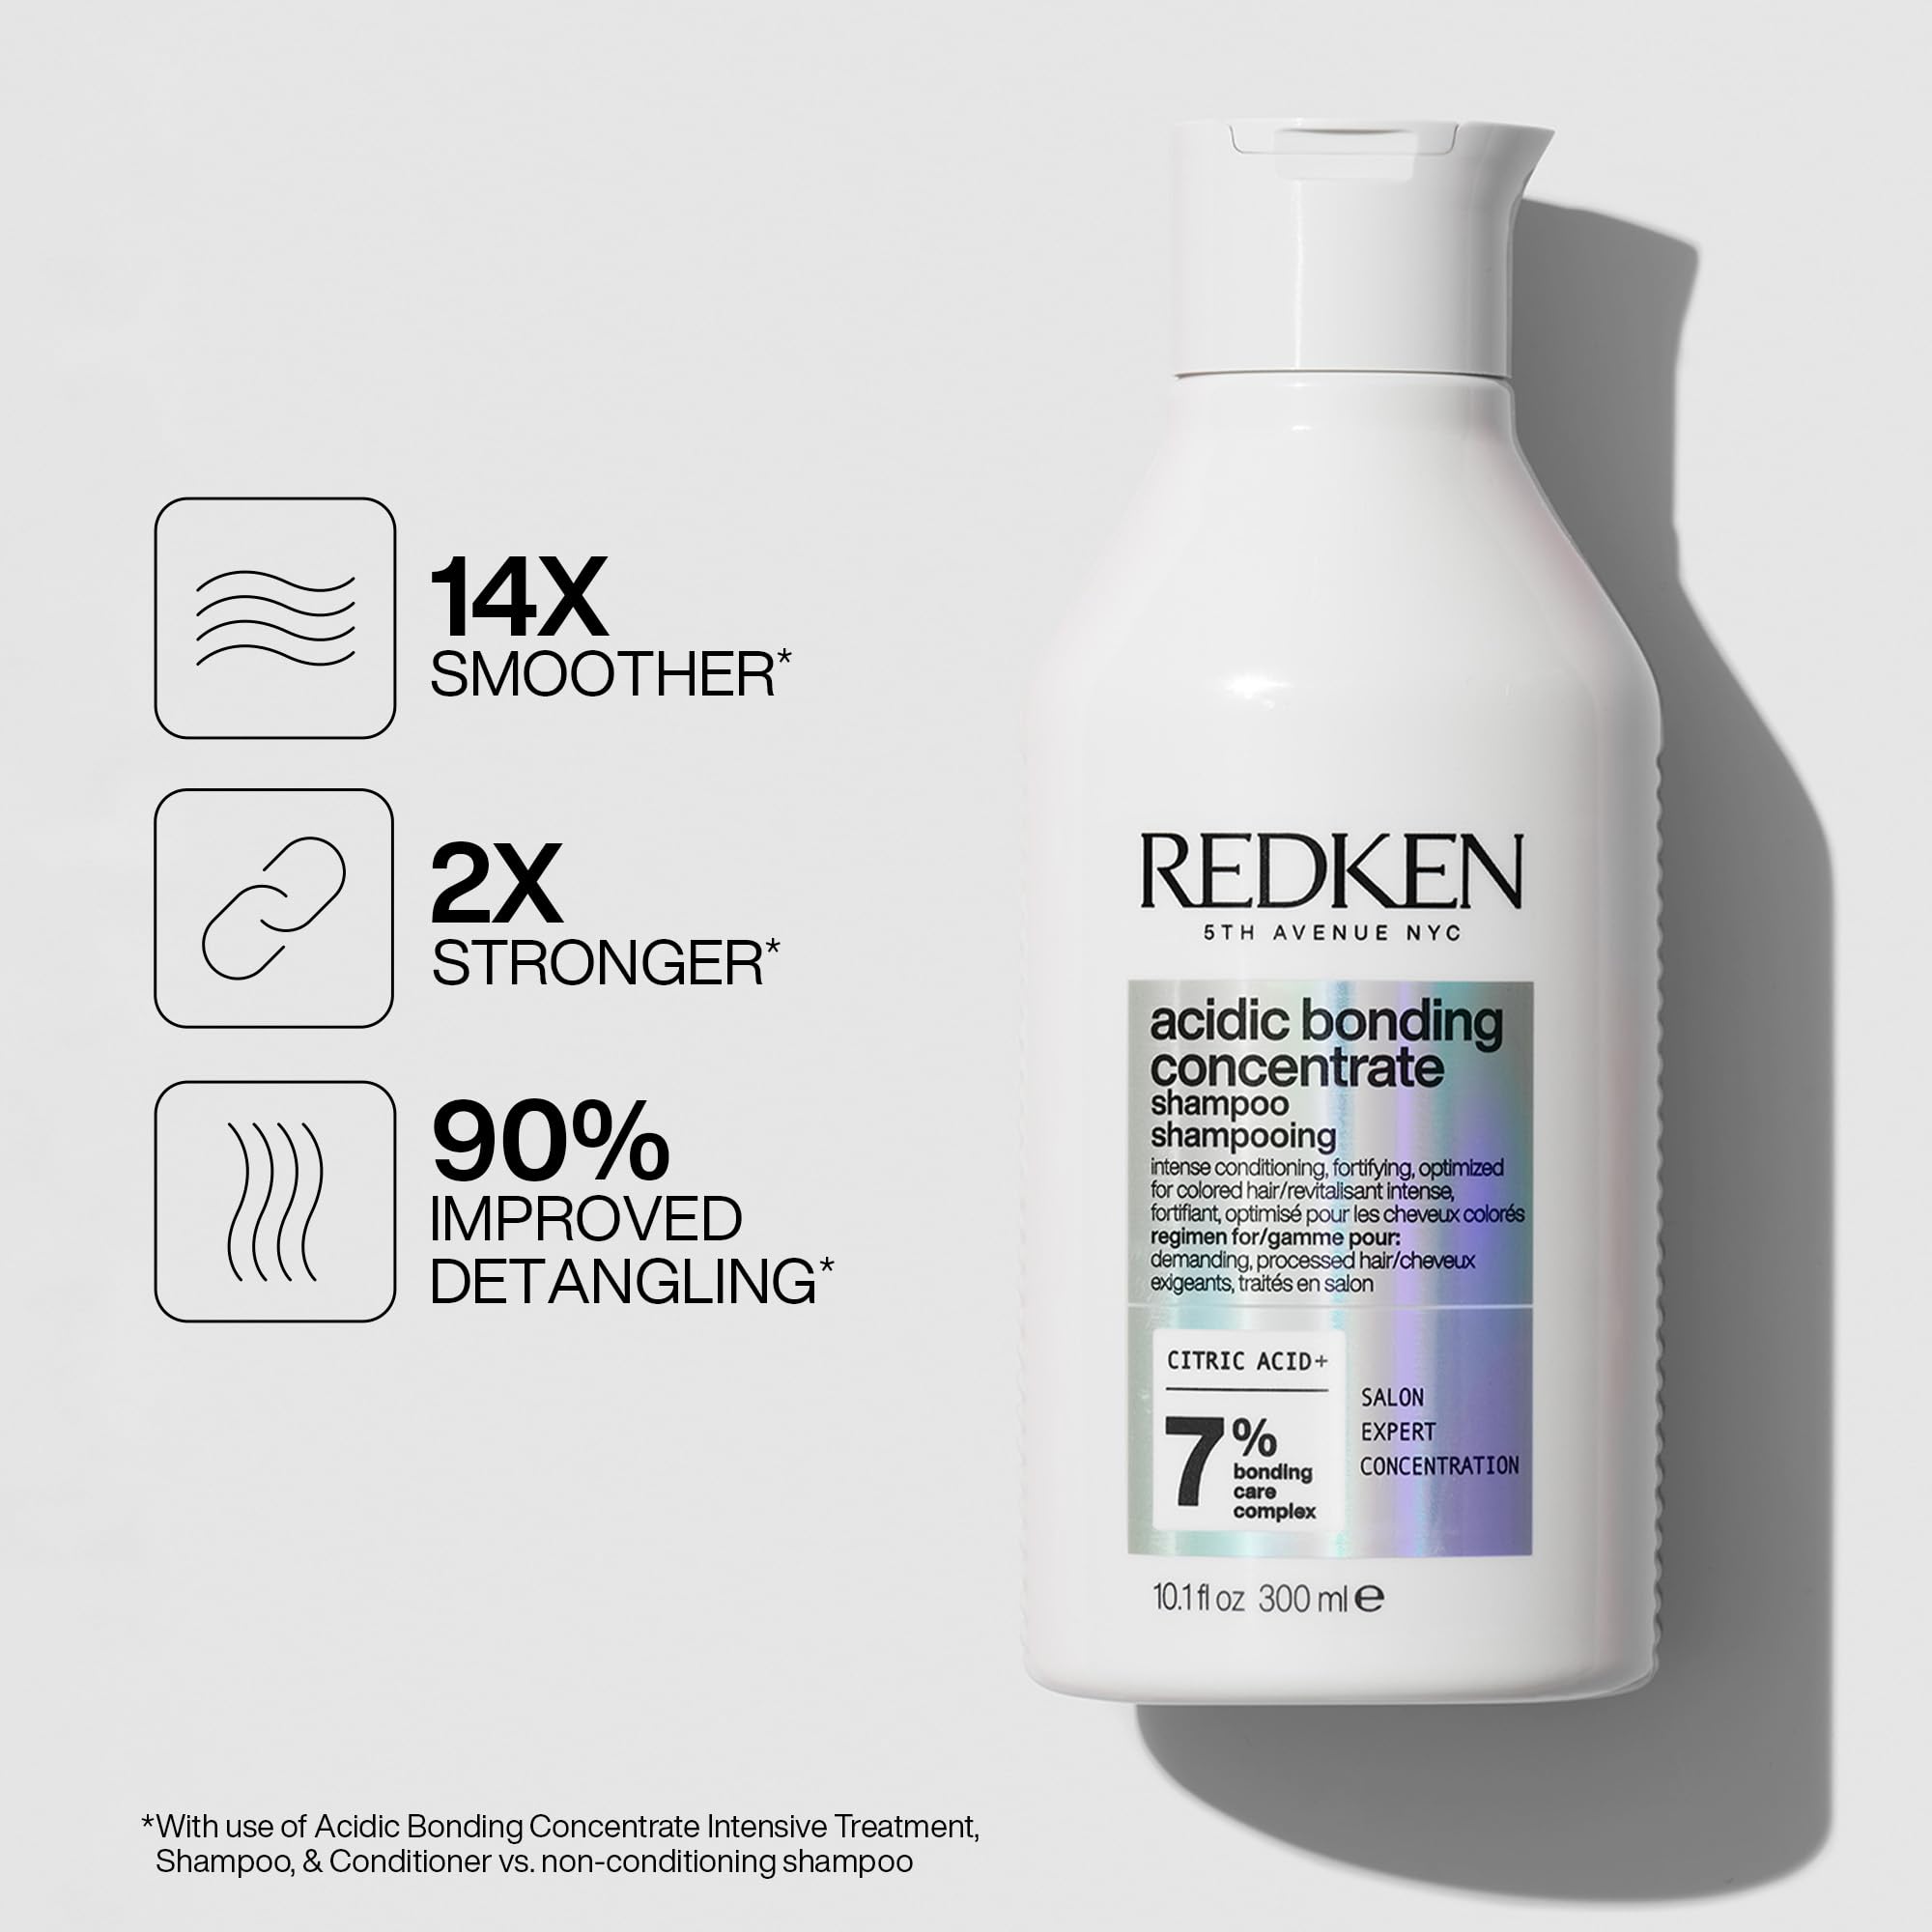 REDKEN Bonding Shampoo for Damaged Hair Repair | Strengthens and Repairs Weak and Brittle Hair | Acidic Bonding Concentrate | Safe for Color-Treated Hair | For All Hair Types